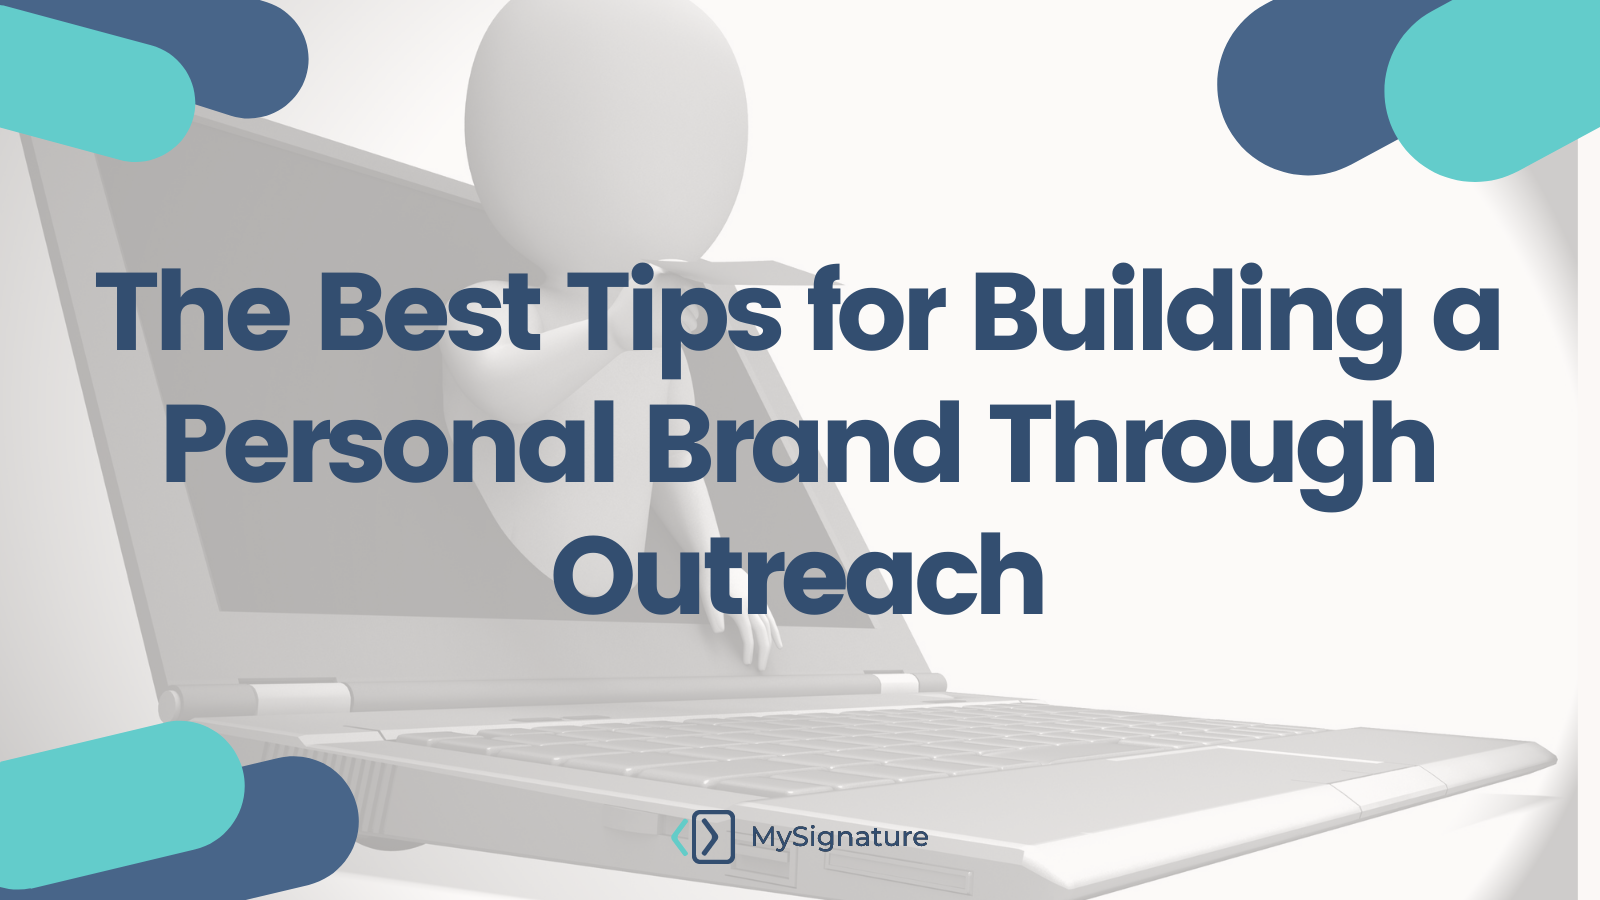 The Best Tips for Building a Personal Brand Through Outreach